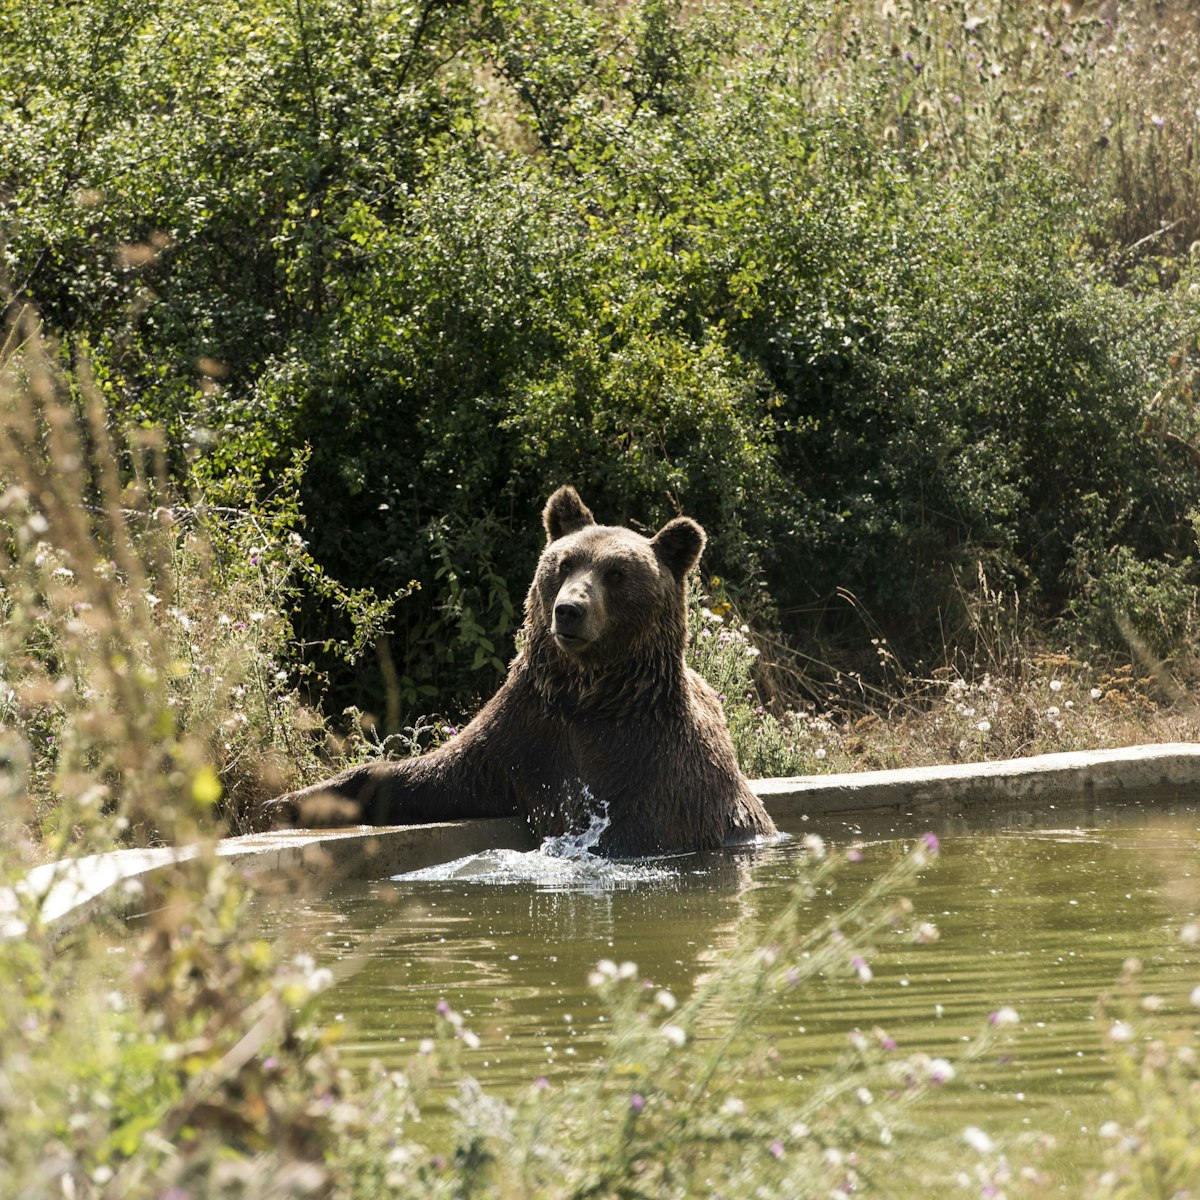 A brown bear cools off in a pool at the bear sanctuary near the Badovc lake on August 19, 2015 in Badovc, during a heat wave in Kosovo. AFP PHOTO/ARMEND NIMANI        (Photo credit should read ARMEND NIMANI/AFP/Getty Images)